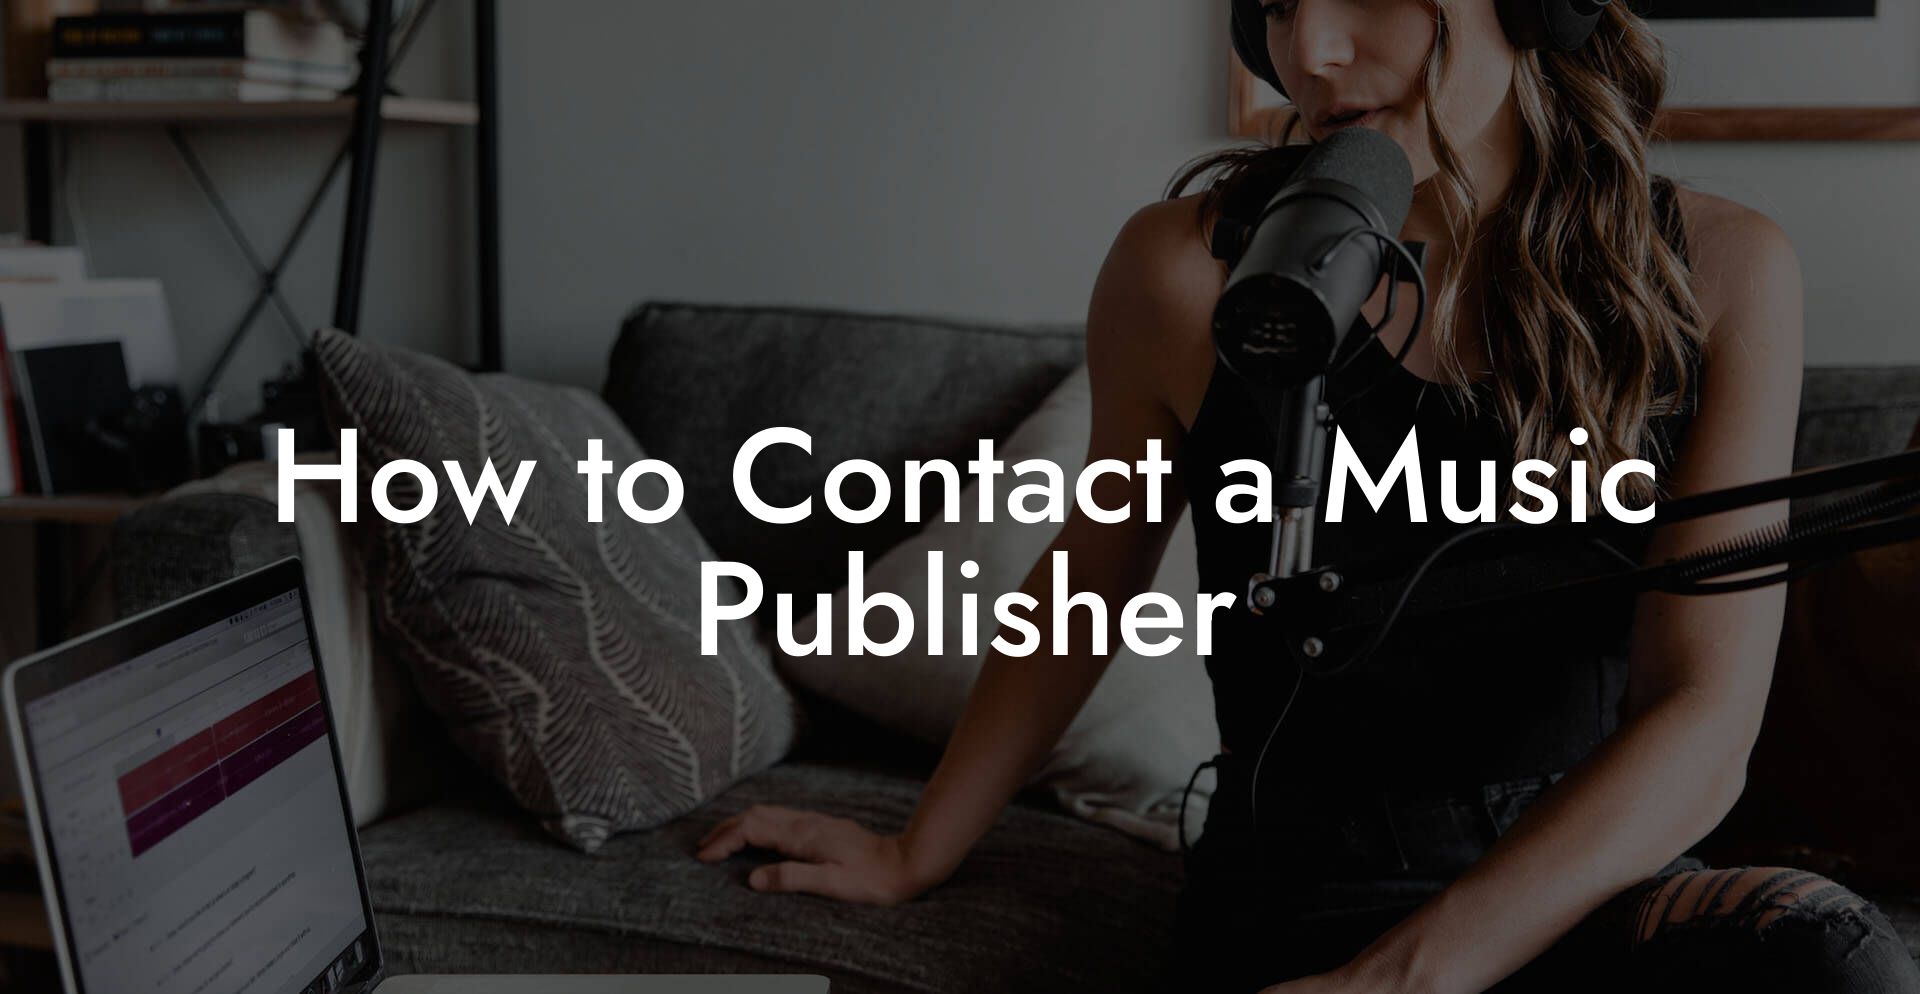 How to Contact a Music Publisher